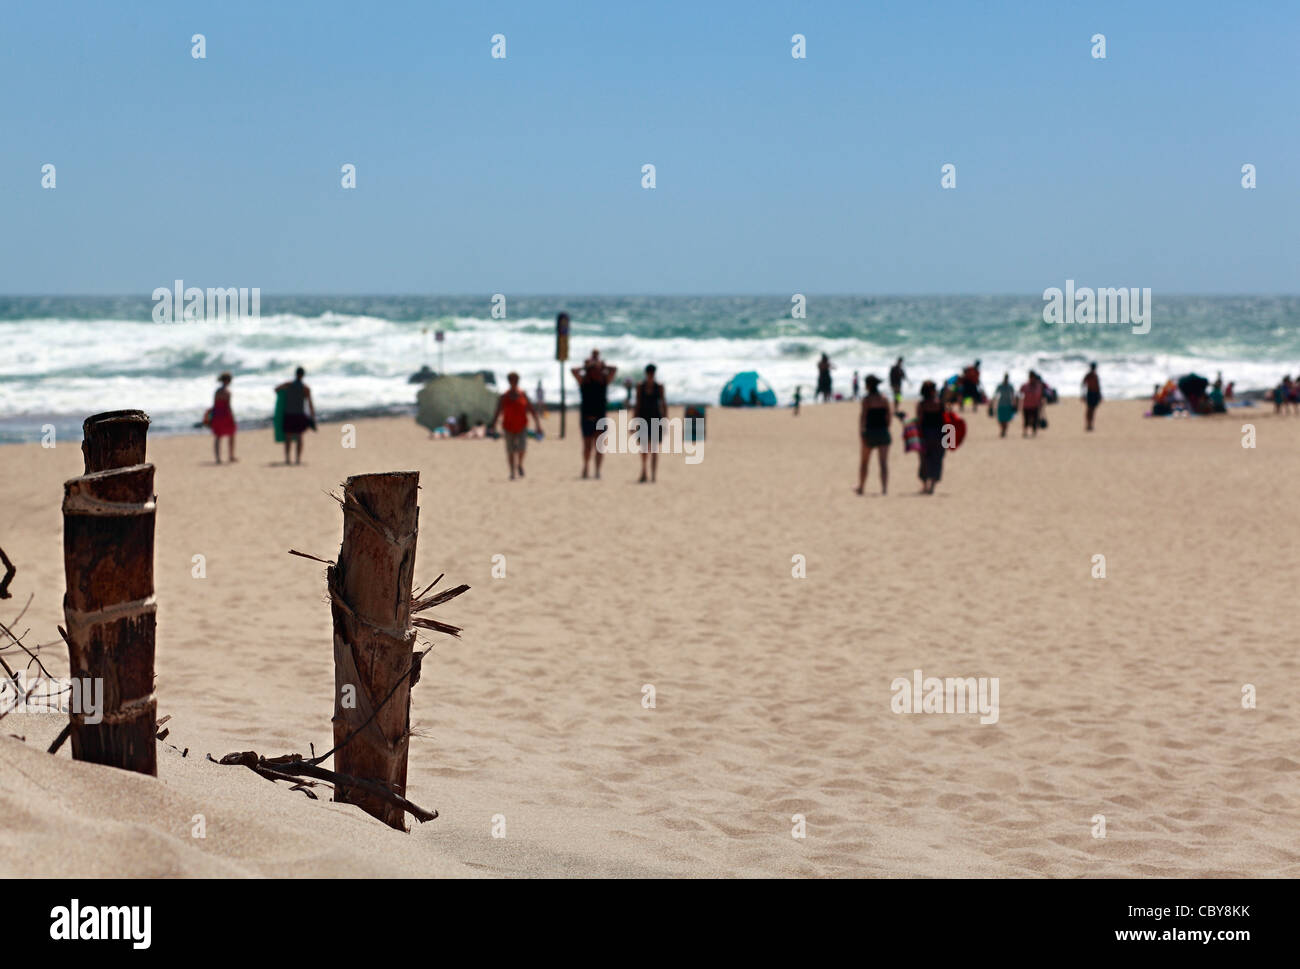 Summer holiday makers on a Durban beach during the Xmas holidays. South Africa. Foreground focus. Stock Photo